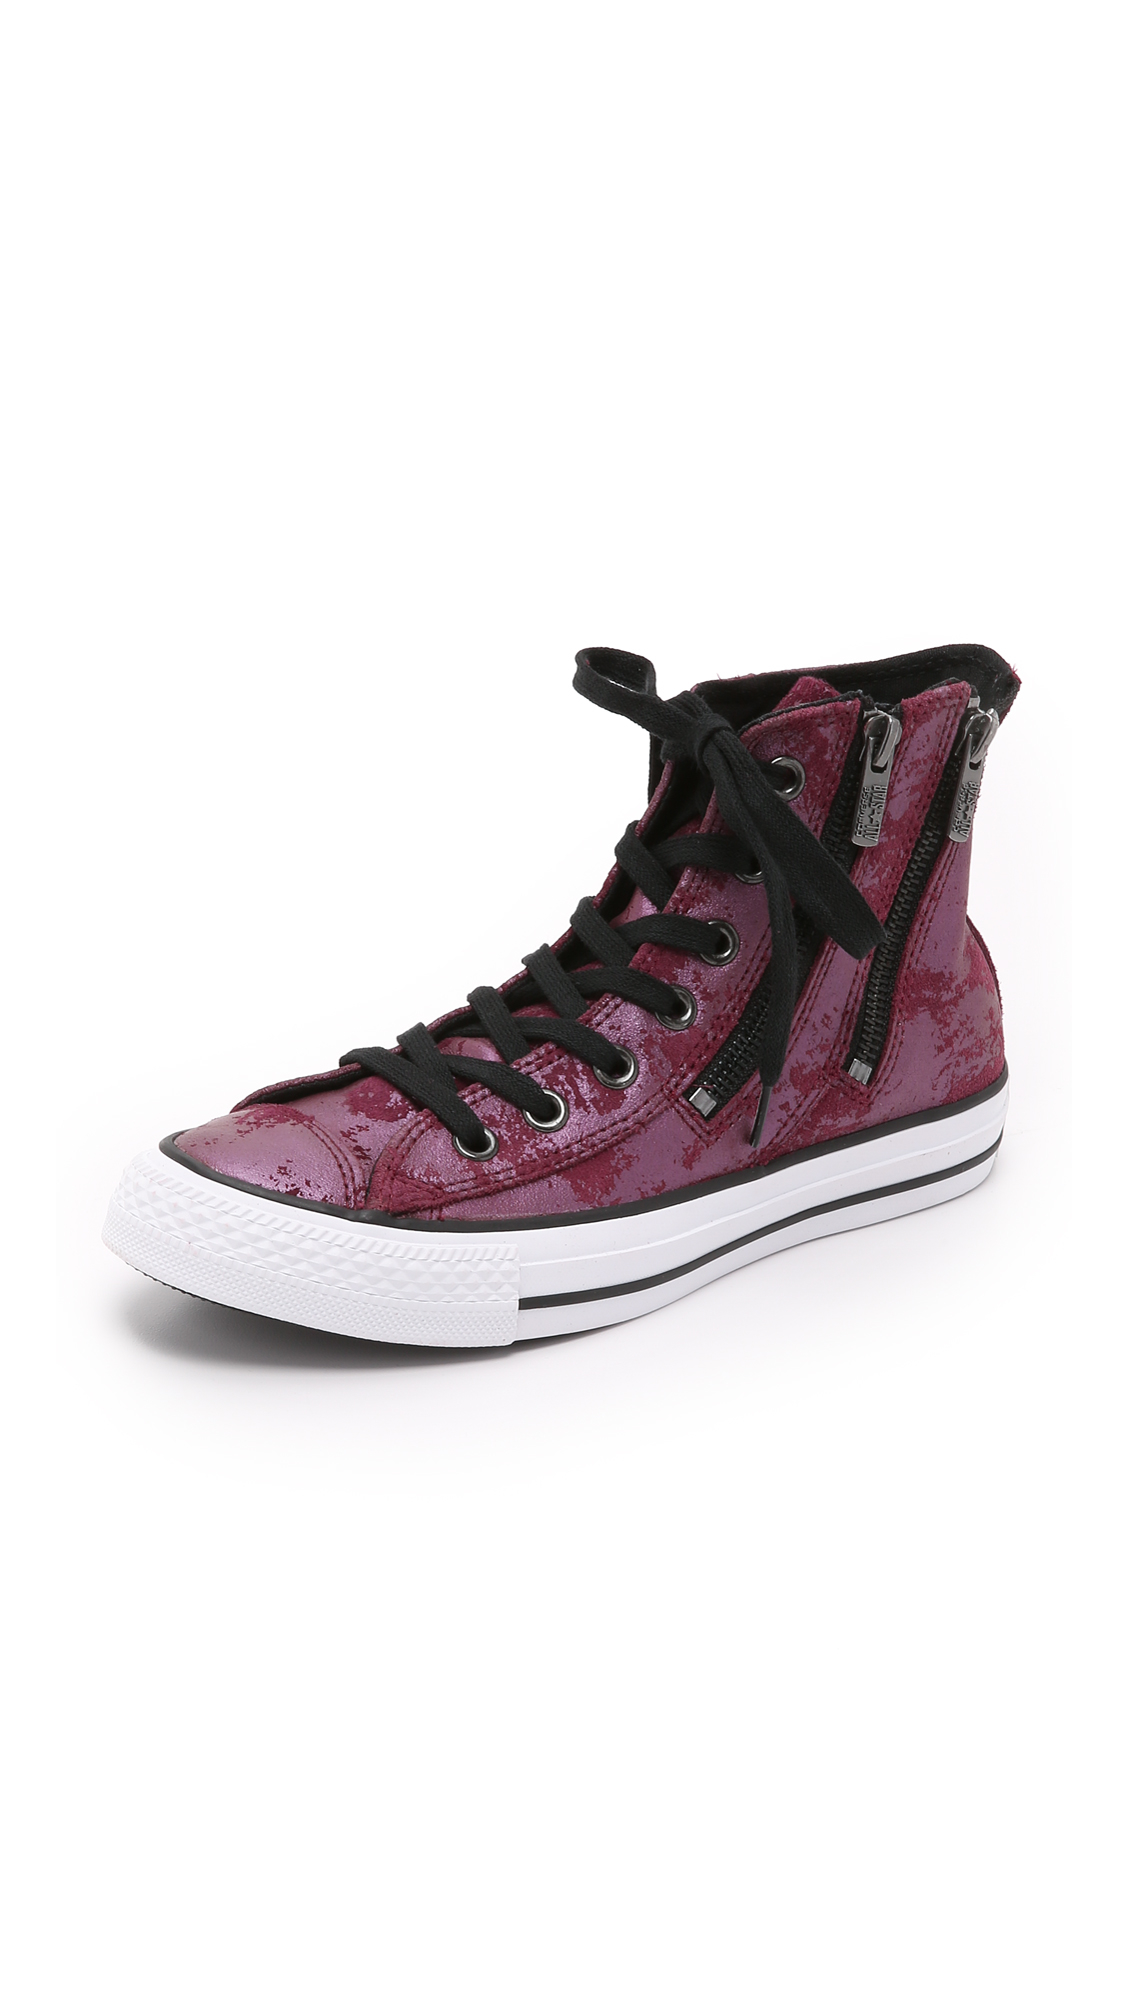 Converse Leather Chuck Taylor All Star Dual Zip High Top Sneakers - Deep  Bordeaux/black in Purple | Lyst